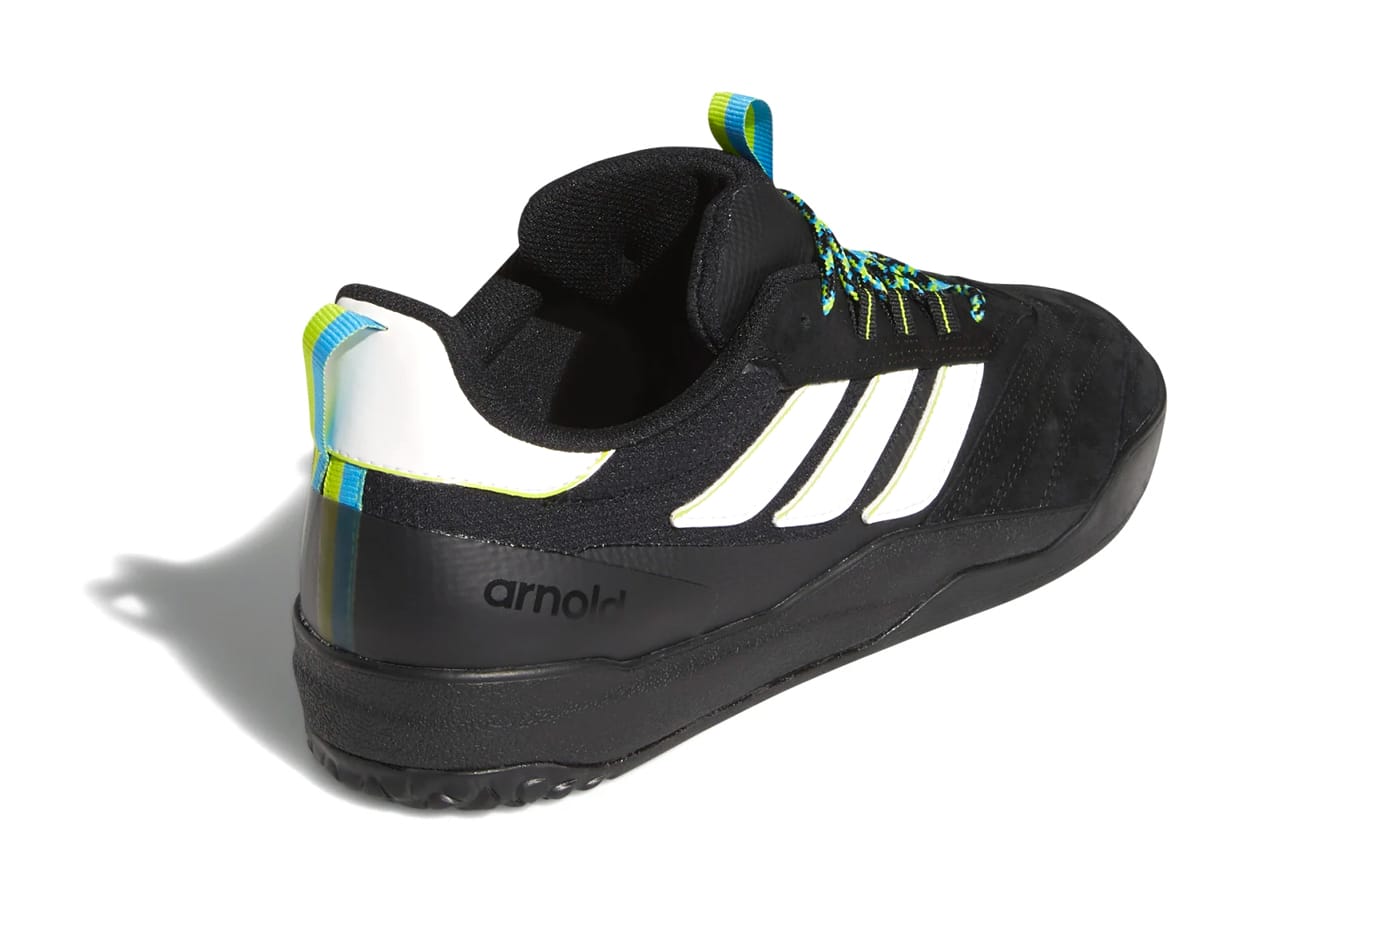 adidas mike arnold copa